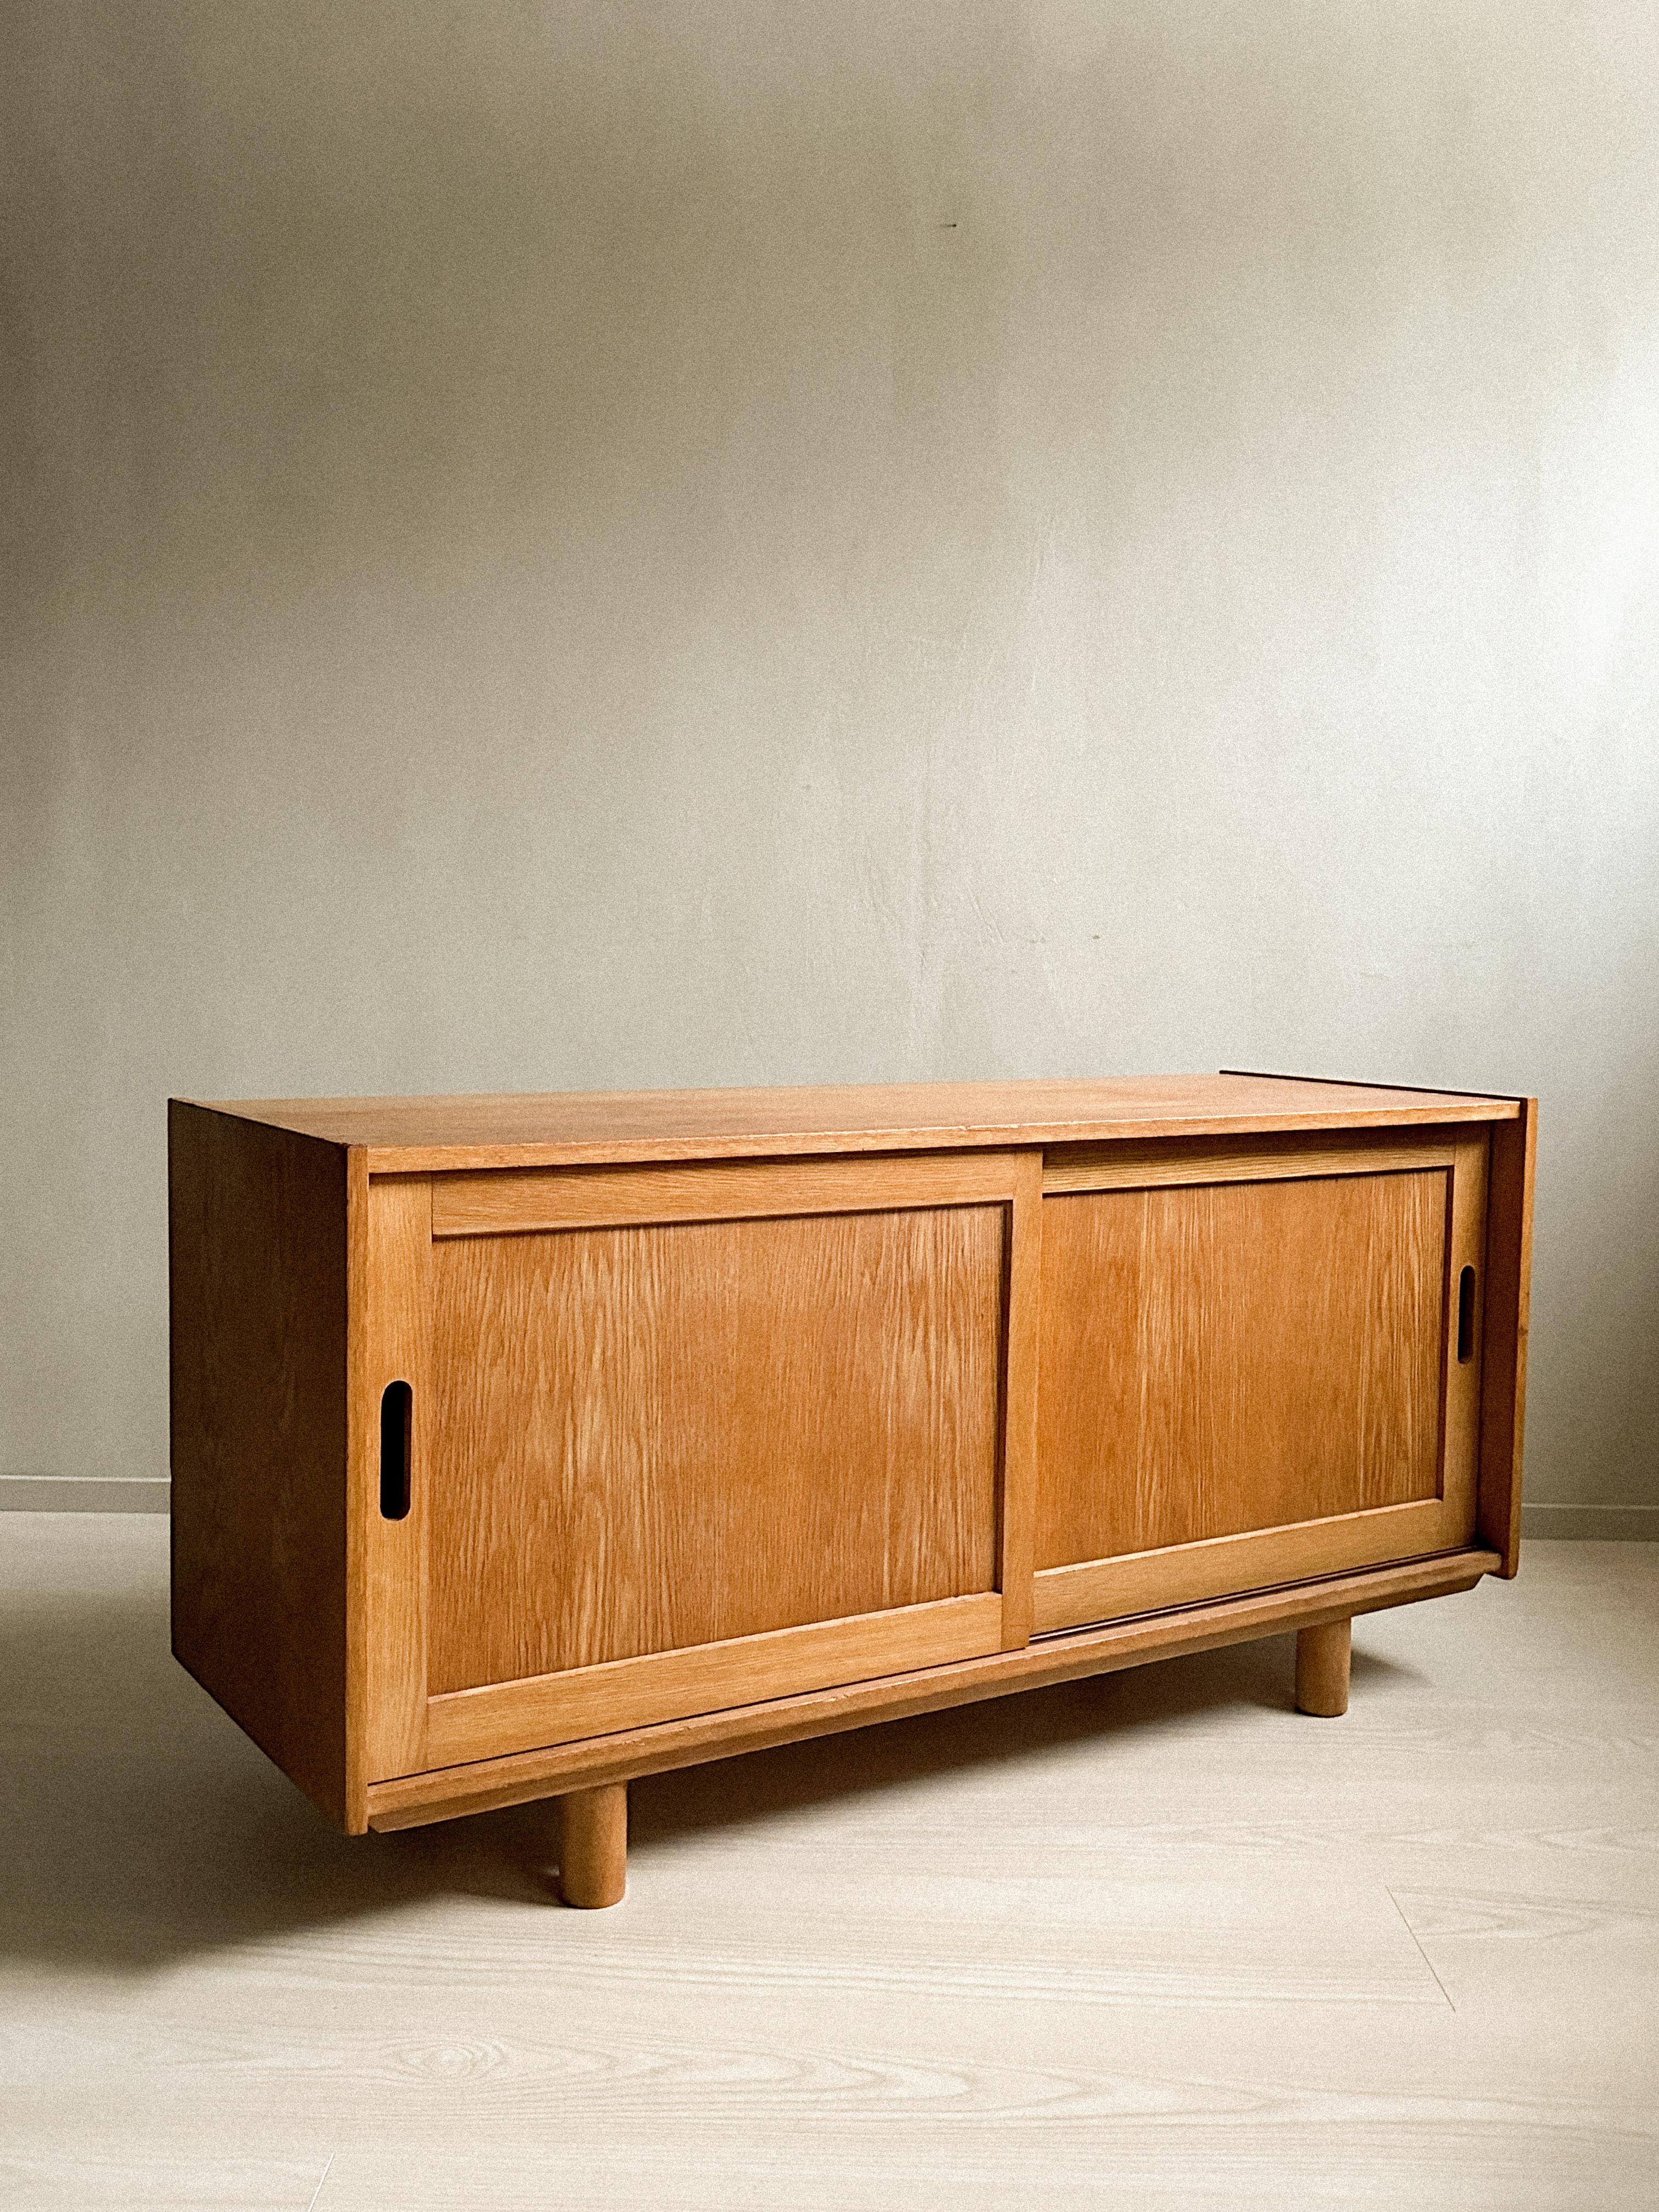 A small mid-century oak sideboard with round feet. Wear consistent with age and use. Marks, scuffs, scratches. 